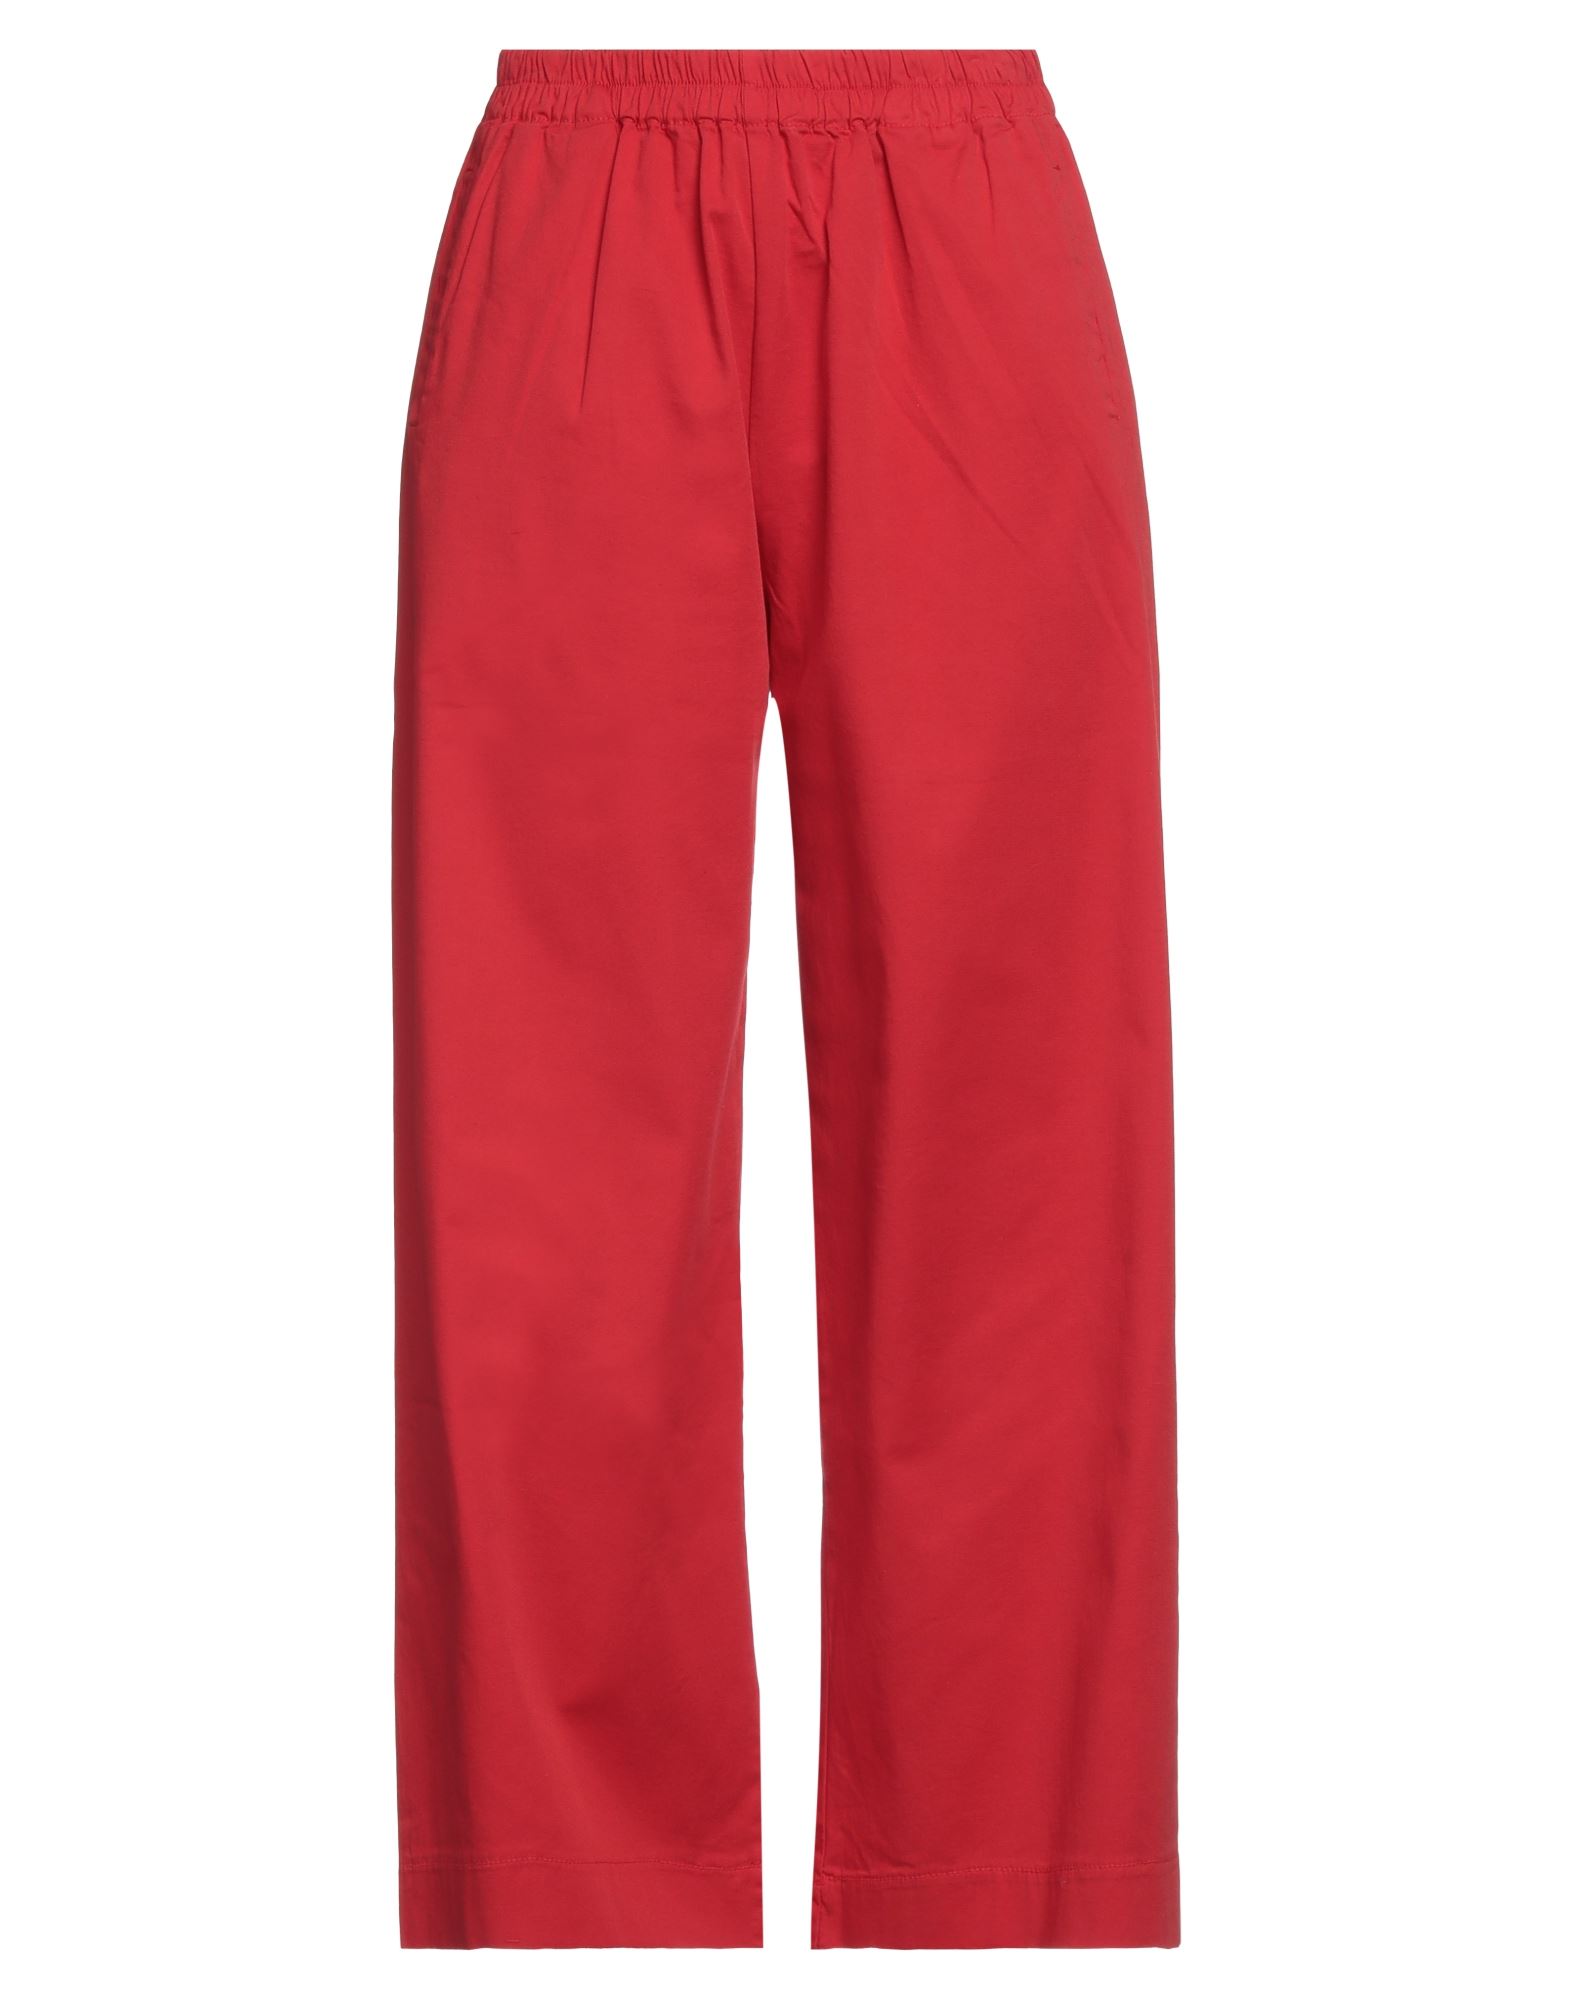 ANOTHER LABEL Hose Damen Rot von ANOTHER LABEL